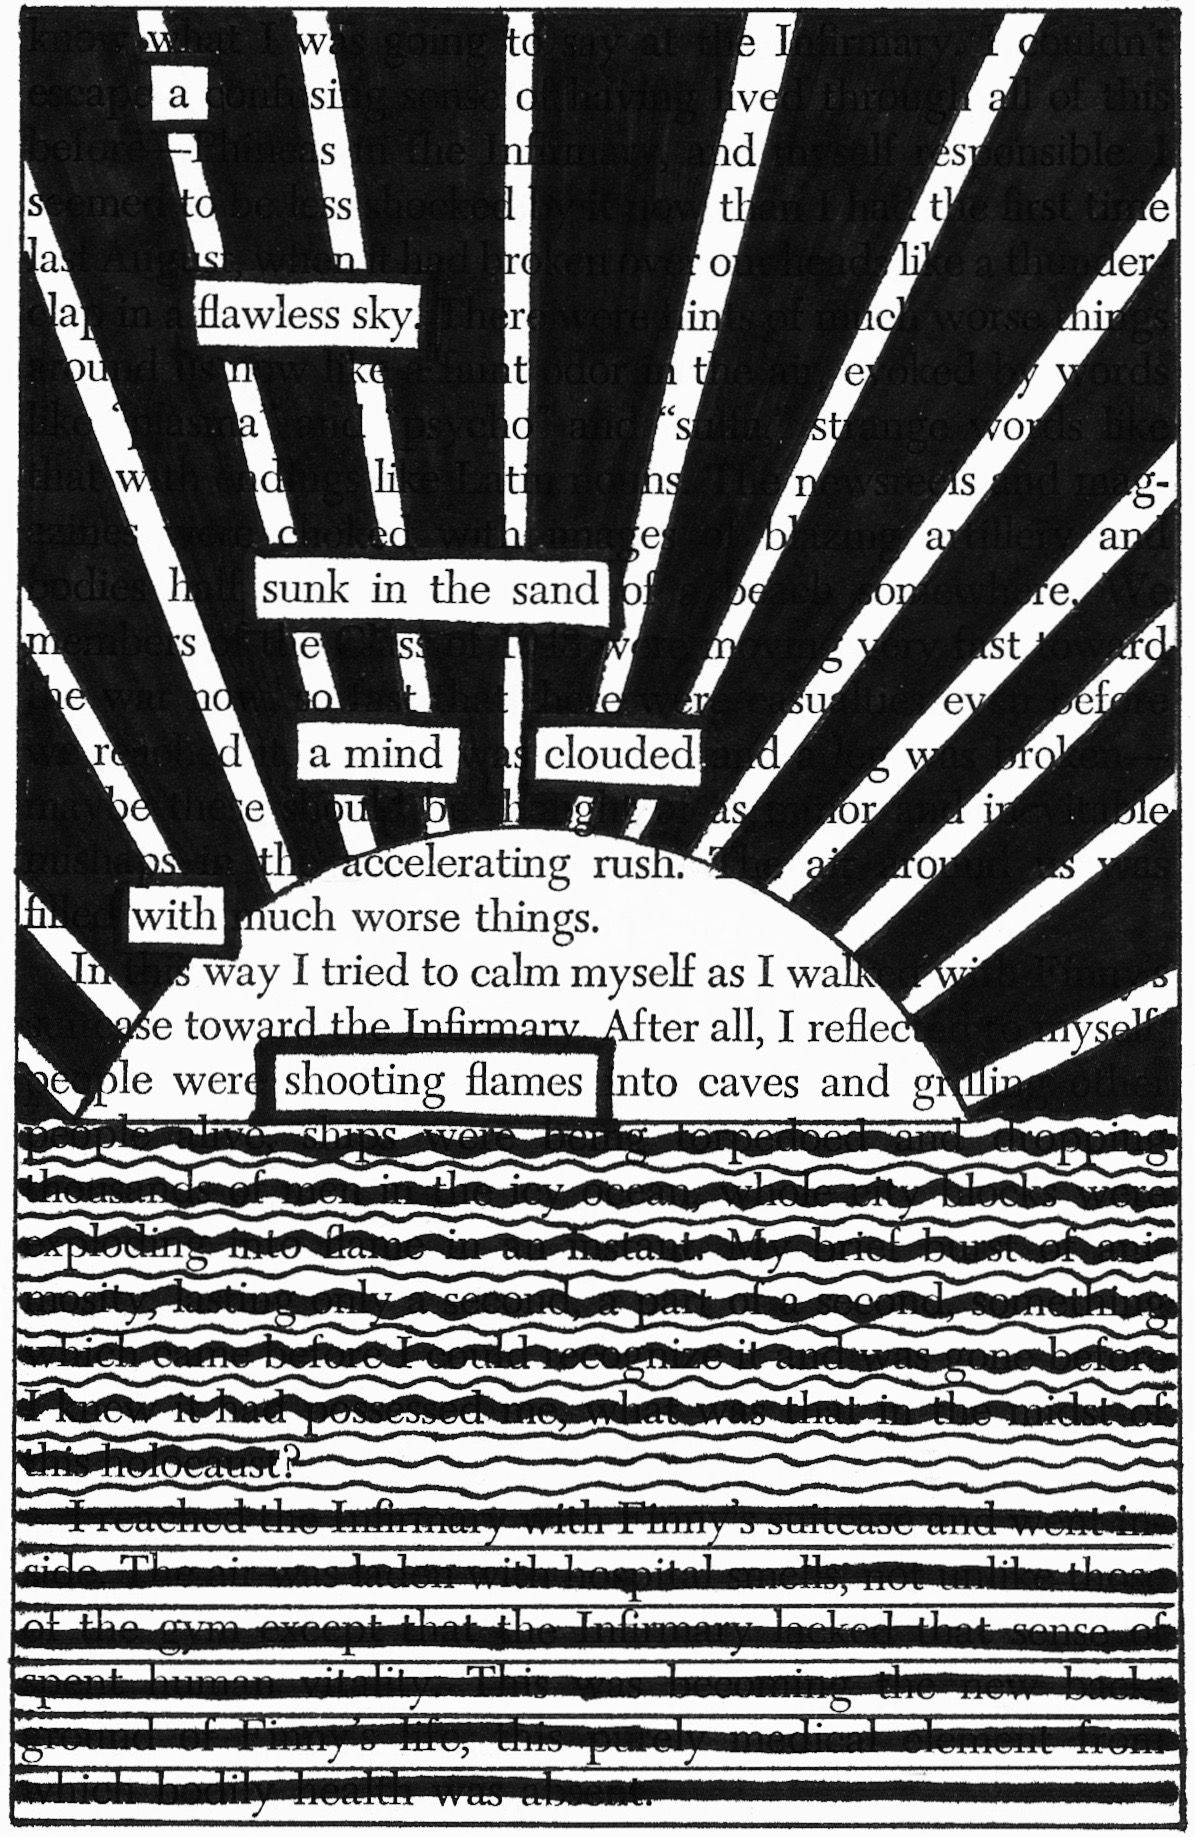 Image of a page of a book with most of the wording crossed out and certain words circled to create a poem.